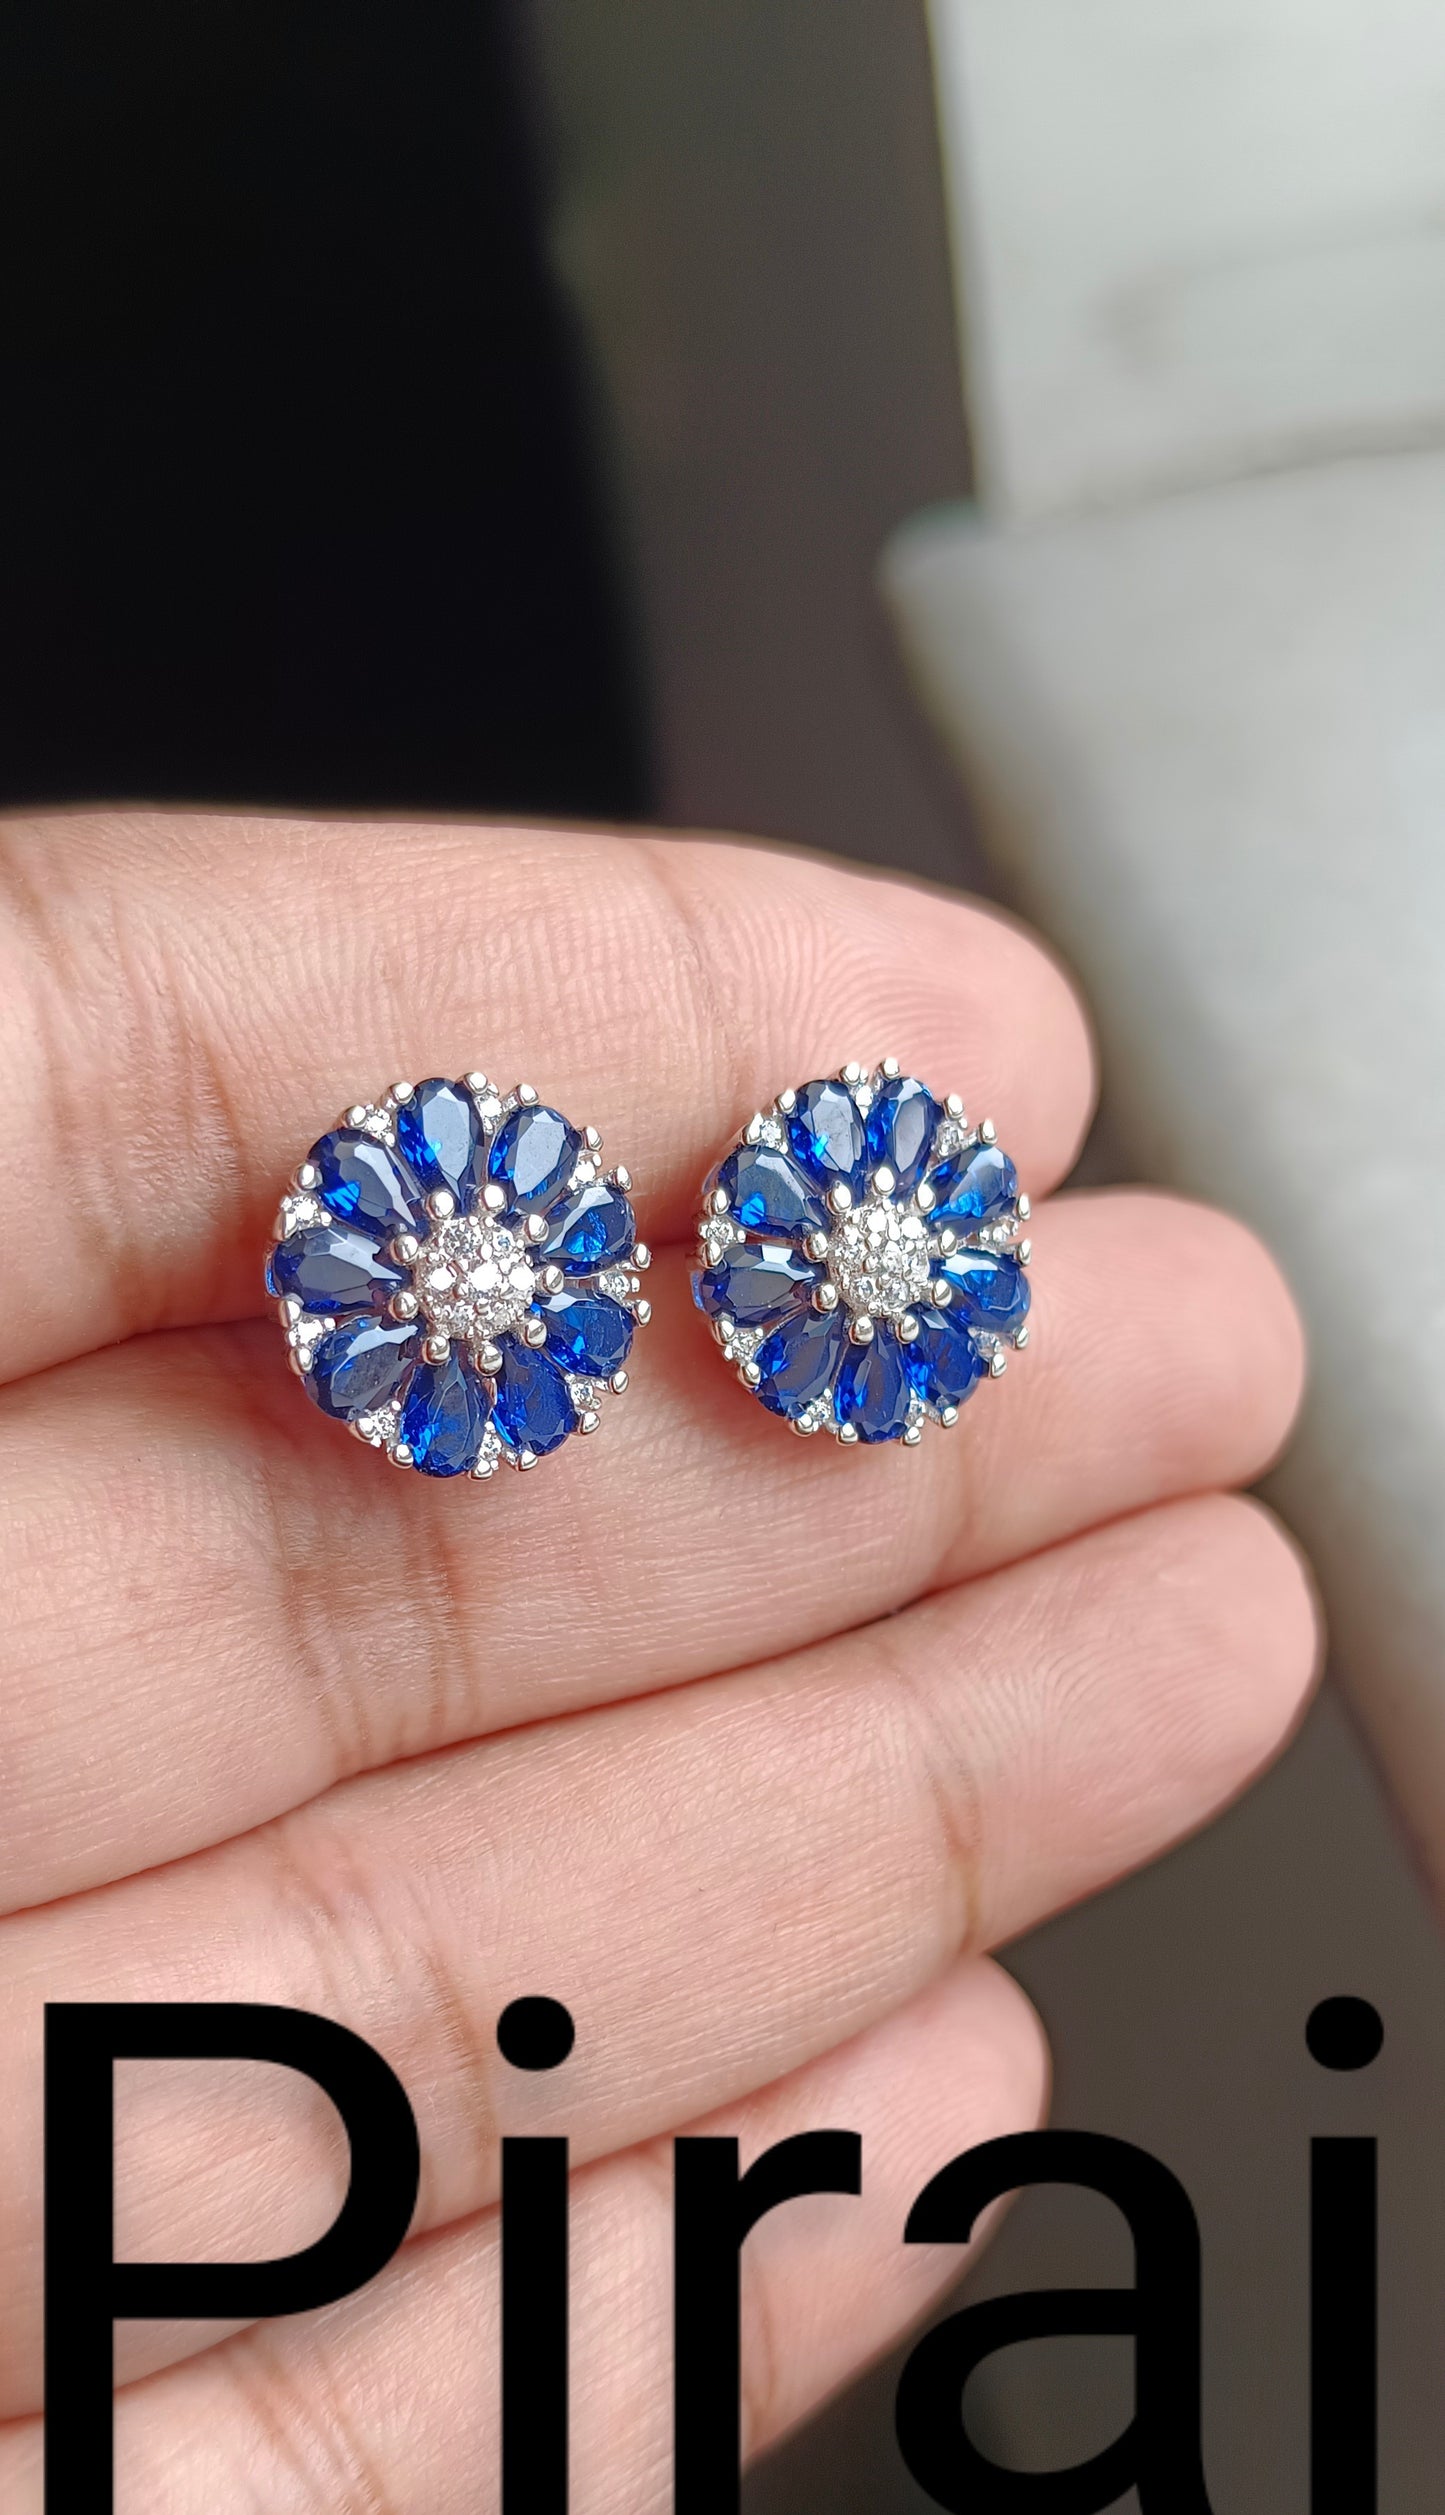 Beautiful 925 Silver Studs with blue and white premium stones